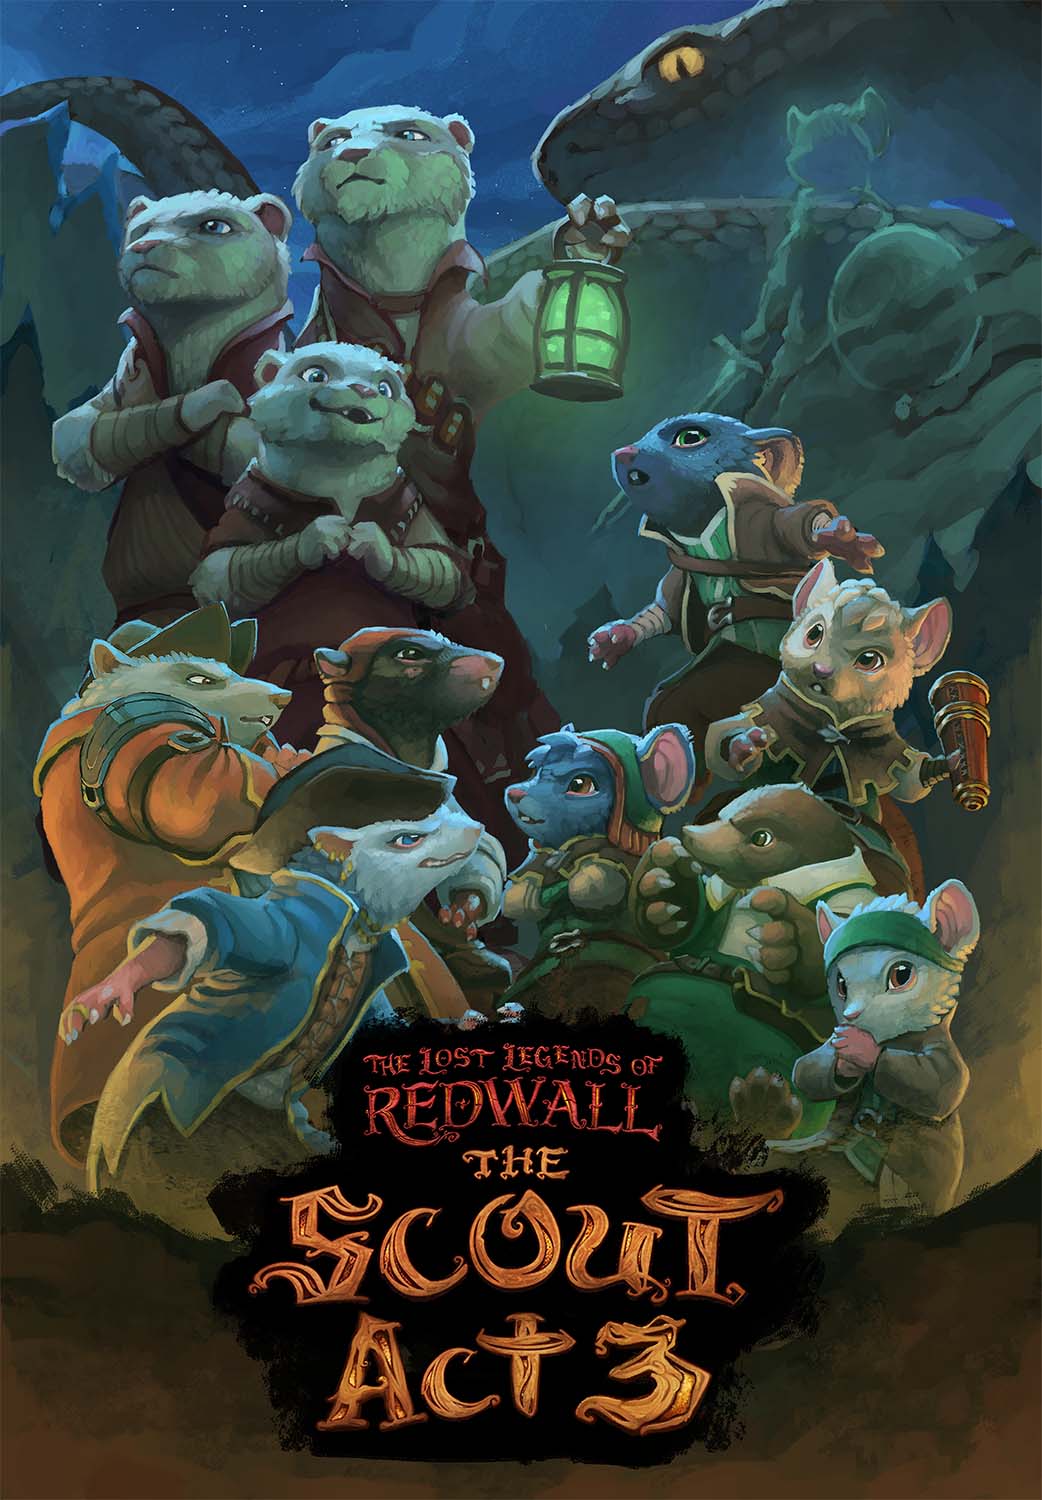 The lost legends of redwall. The Lost Legends of Redwall : the Scout. The Lost Legends of Redwall the Scout Act 3. The Lost Legend of Redwall прохождение.